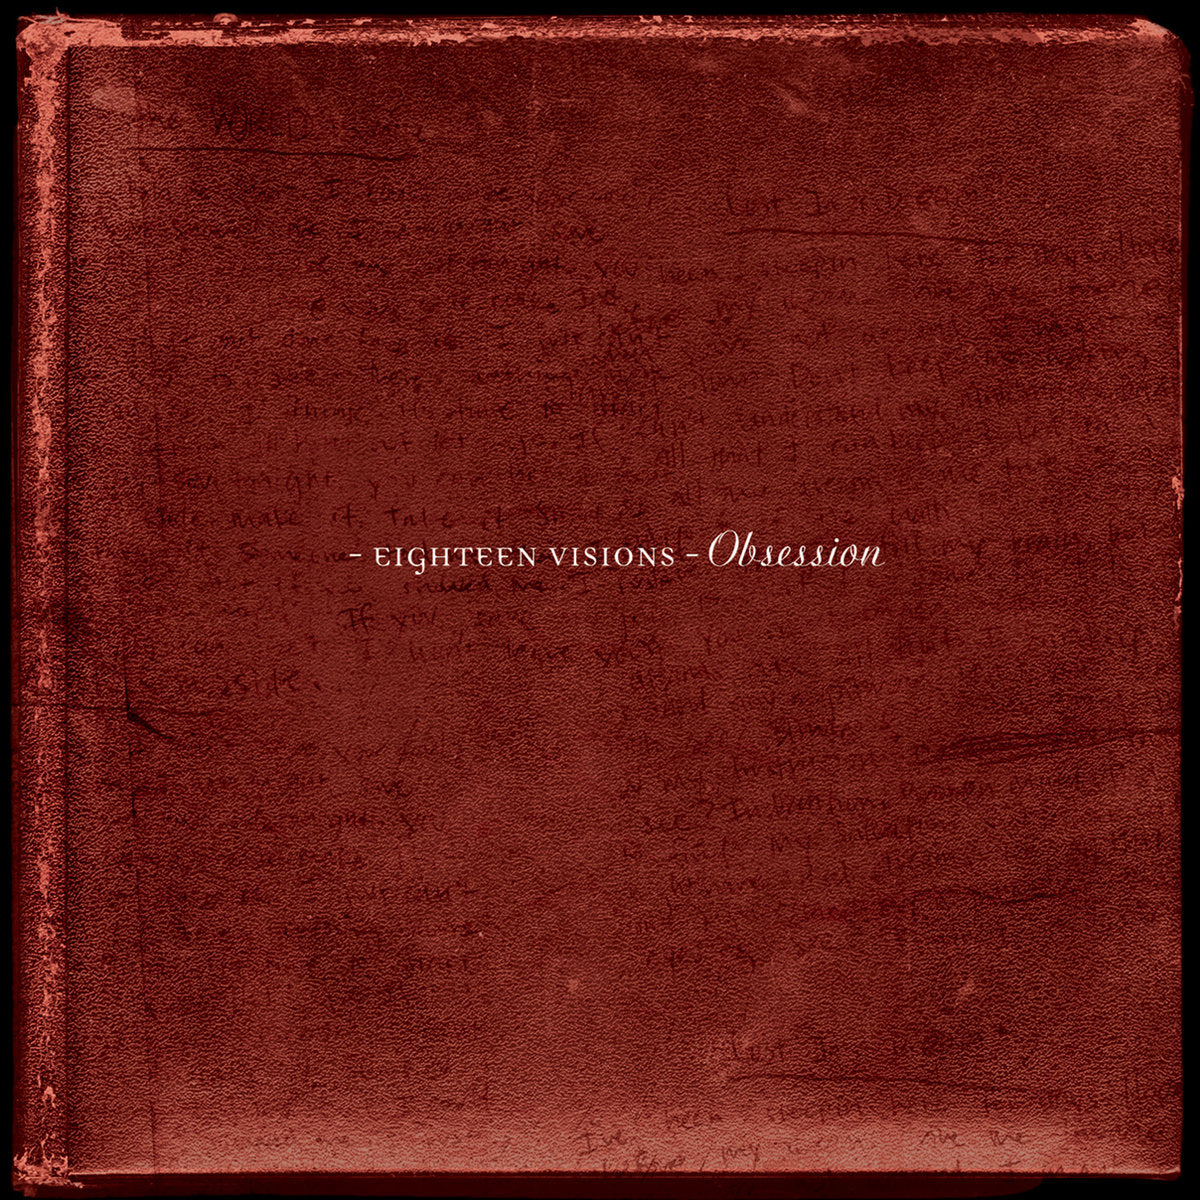 Eighteen Visions "Obsession" CD